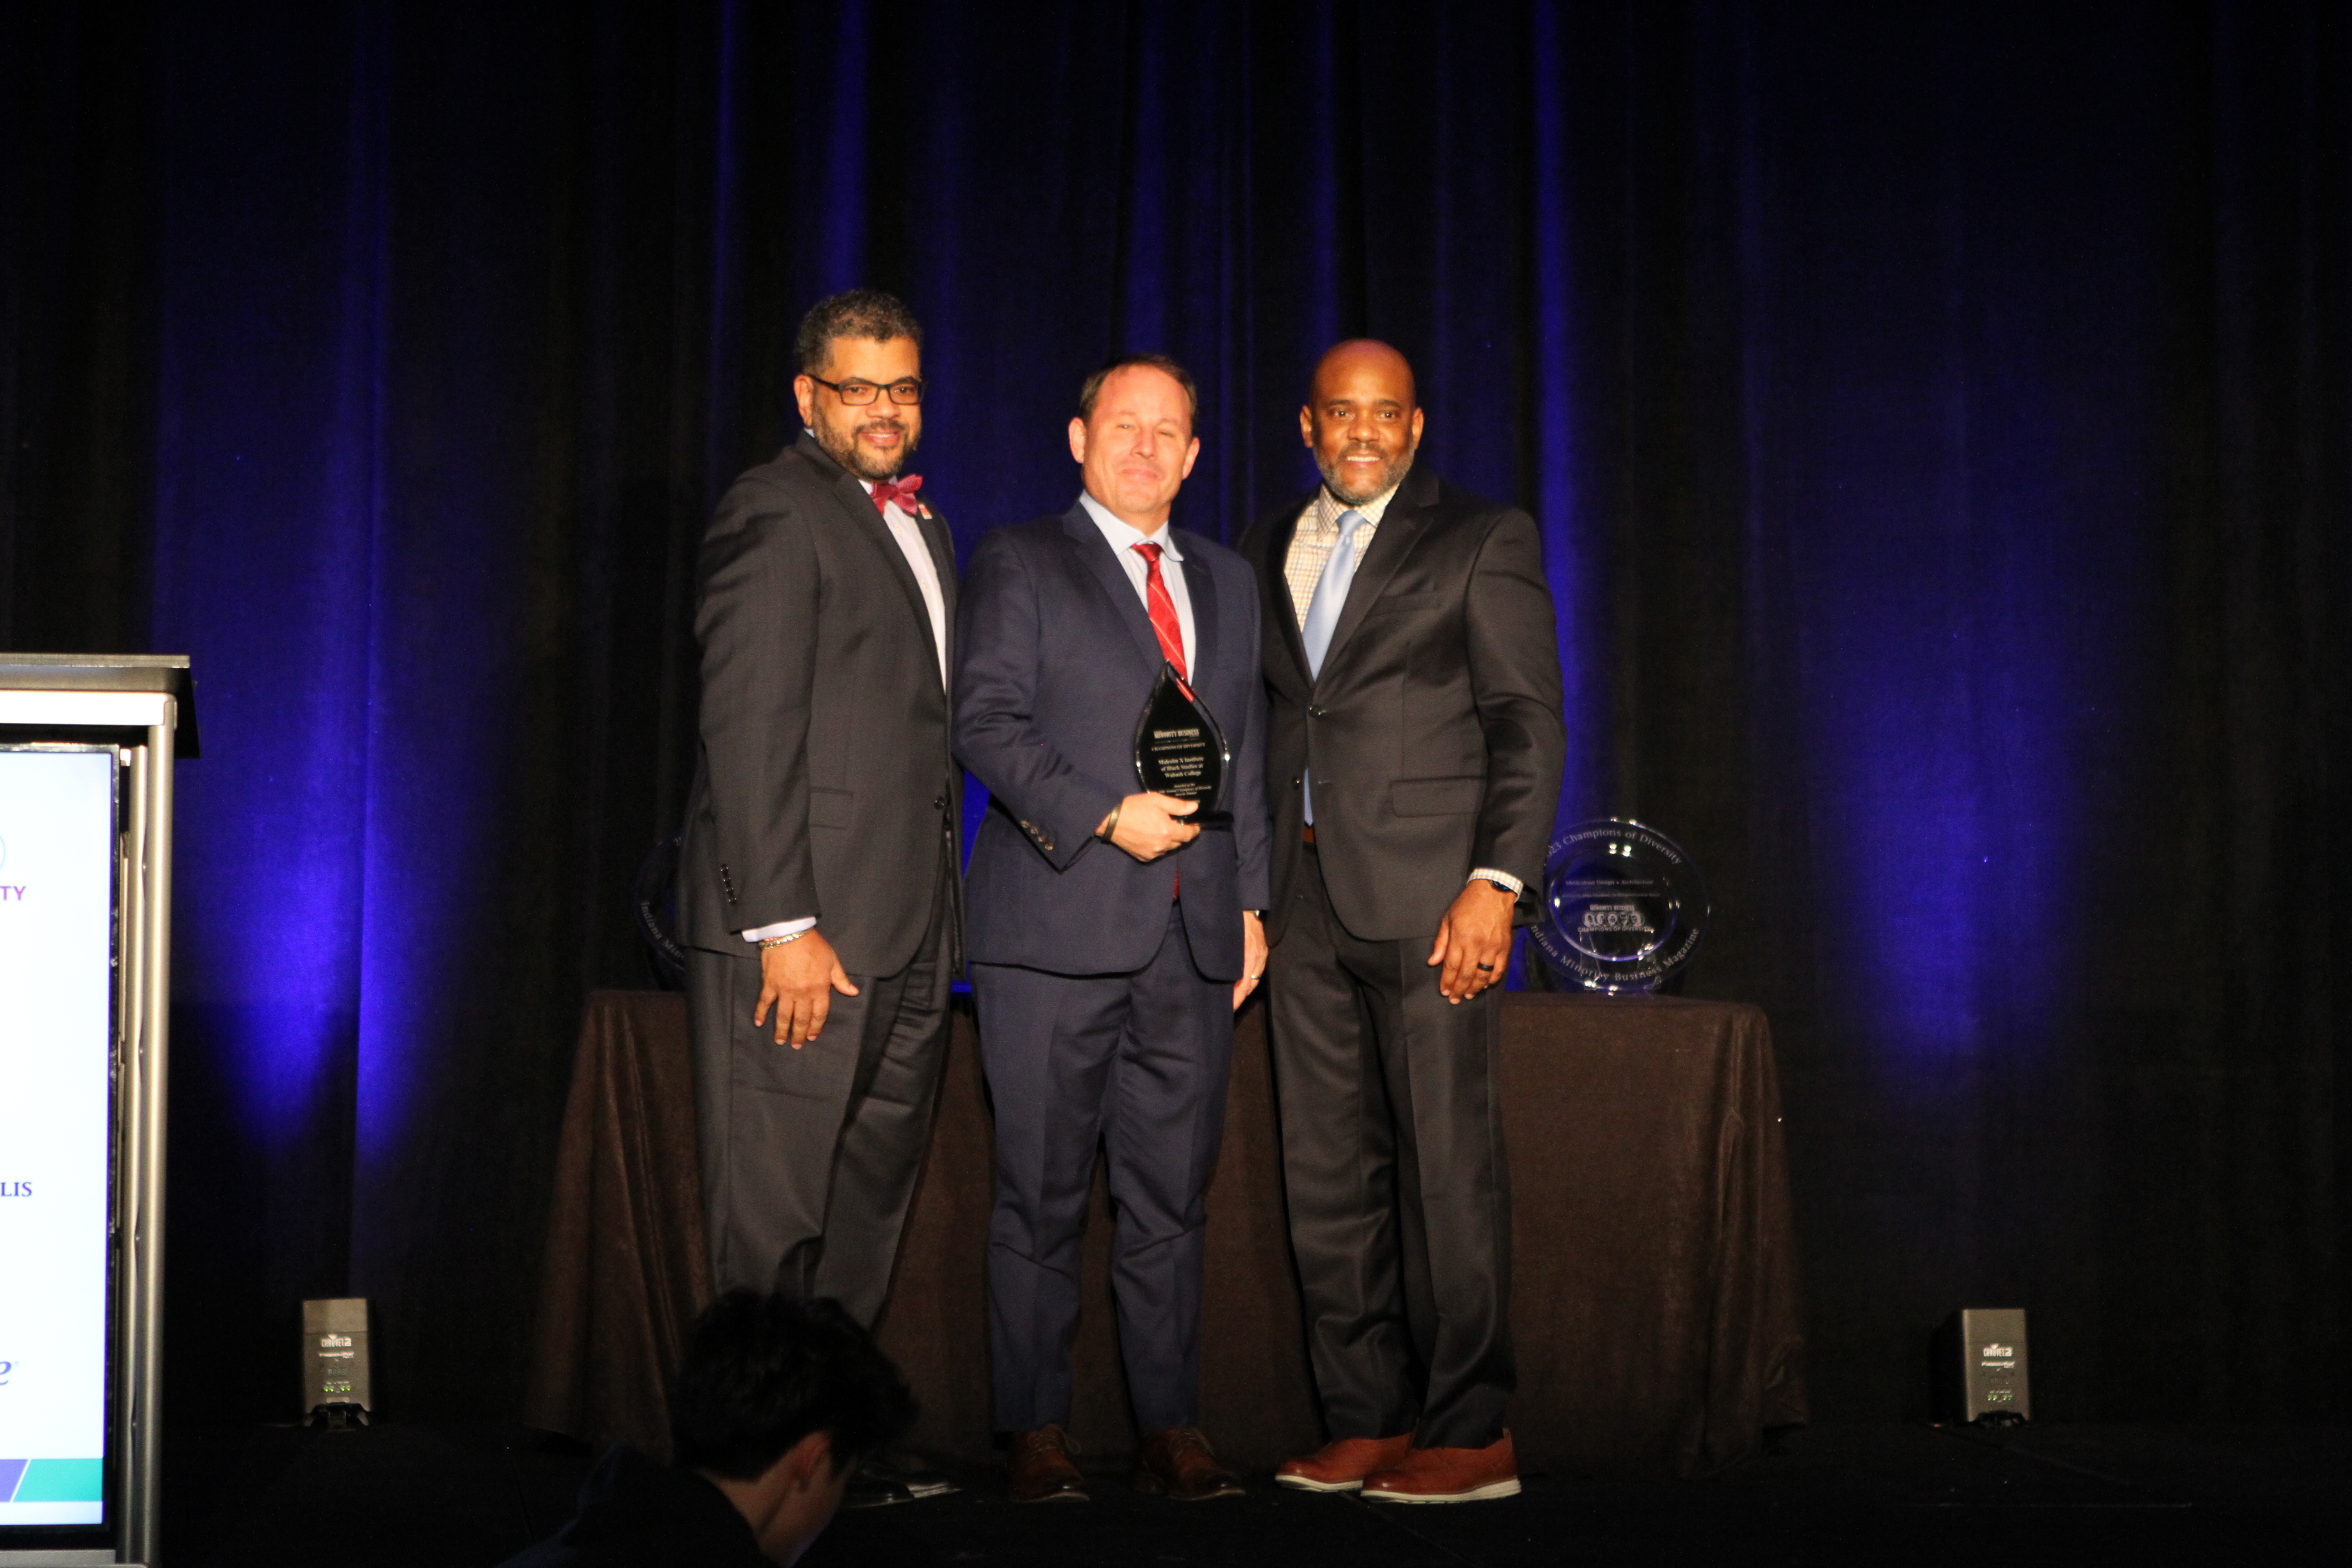 MXIBS Director Steven Jones ’87 (left) and Wabash President Scott Feller receive a Champions of Diversity recognition from the Indiana Minority Business Magazine.